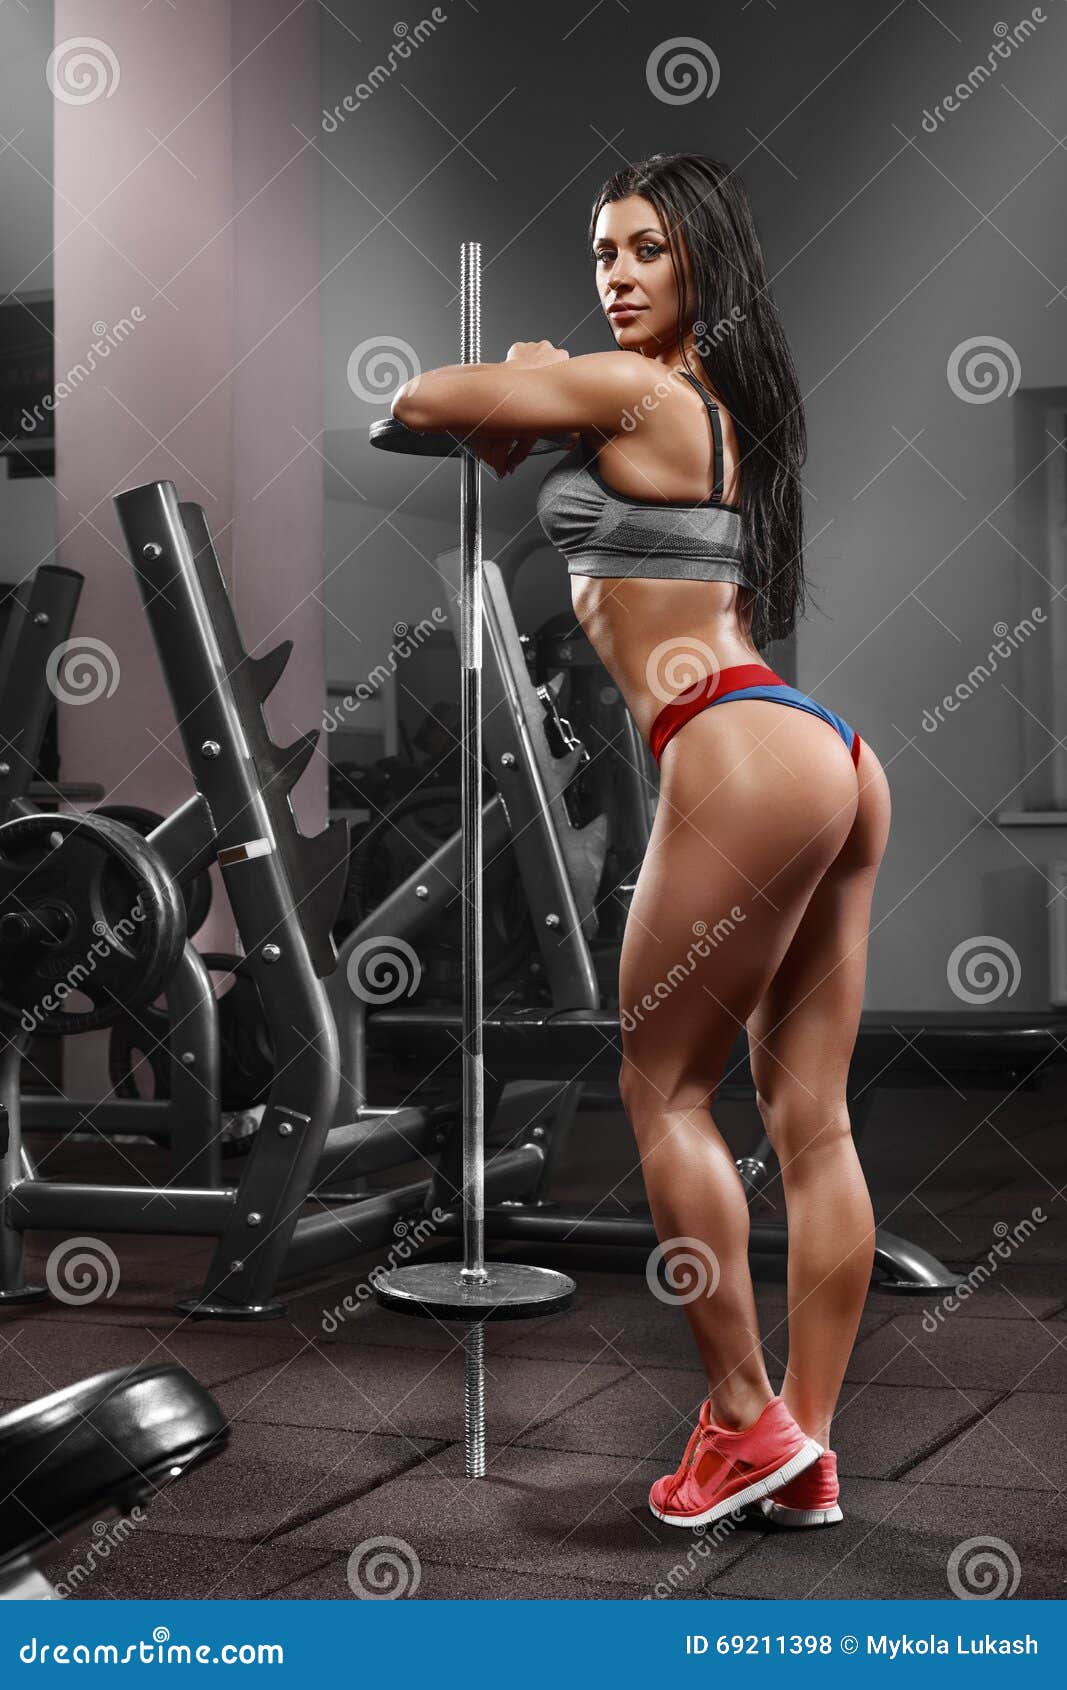 https://thumbs.dreamstime.com/z/fitness-girl-sexy-athletic-woman-working-out-barbell-gym-sexy-beautiful-ass-thong-69211398.jpg